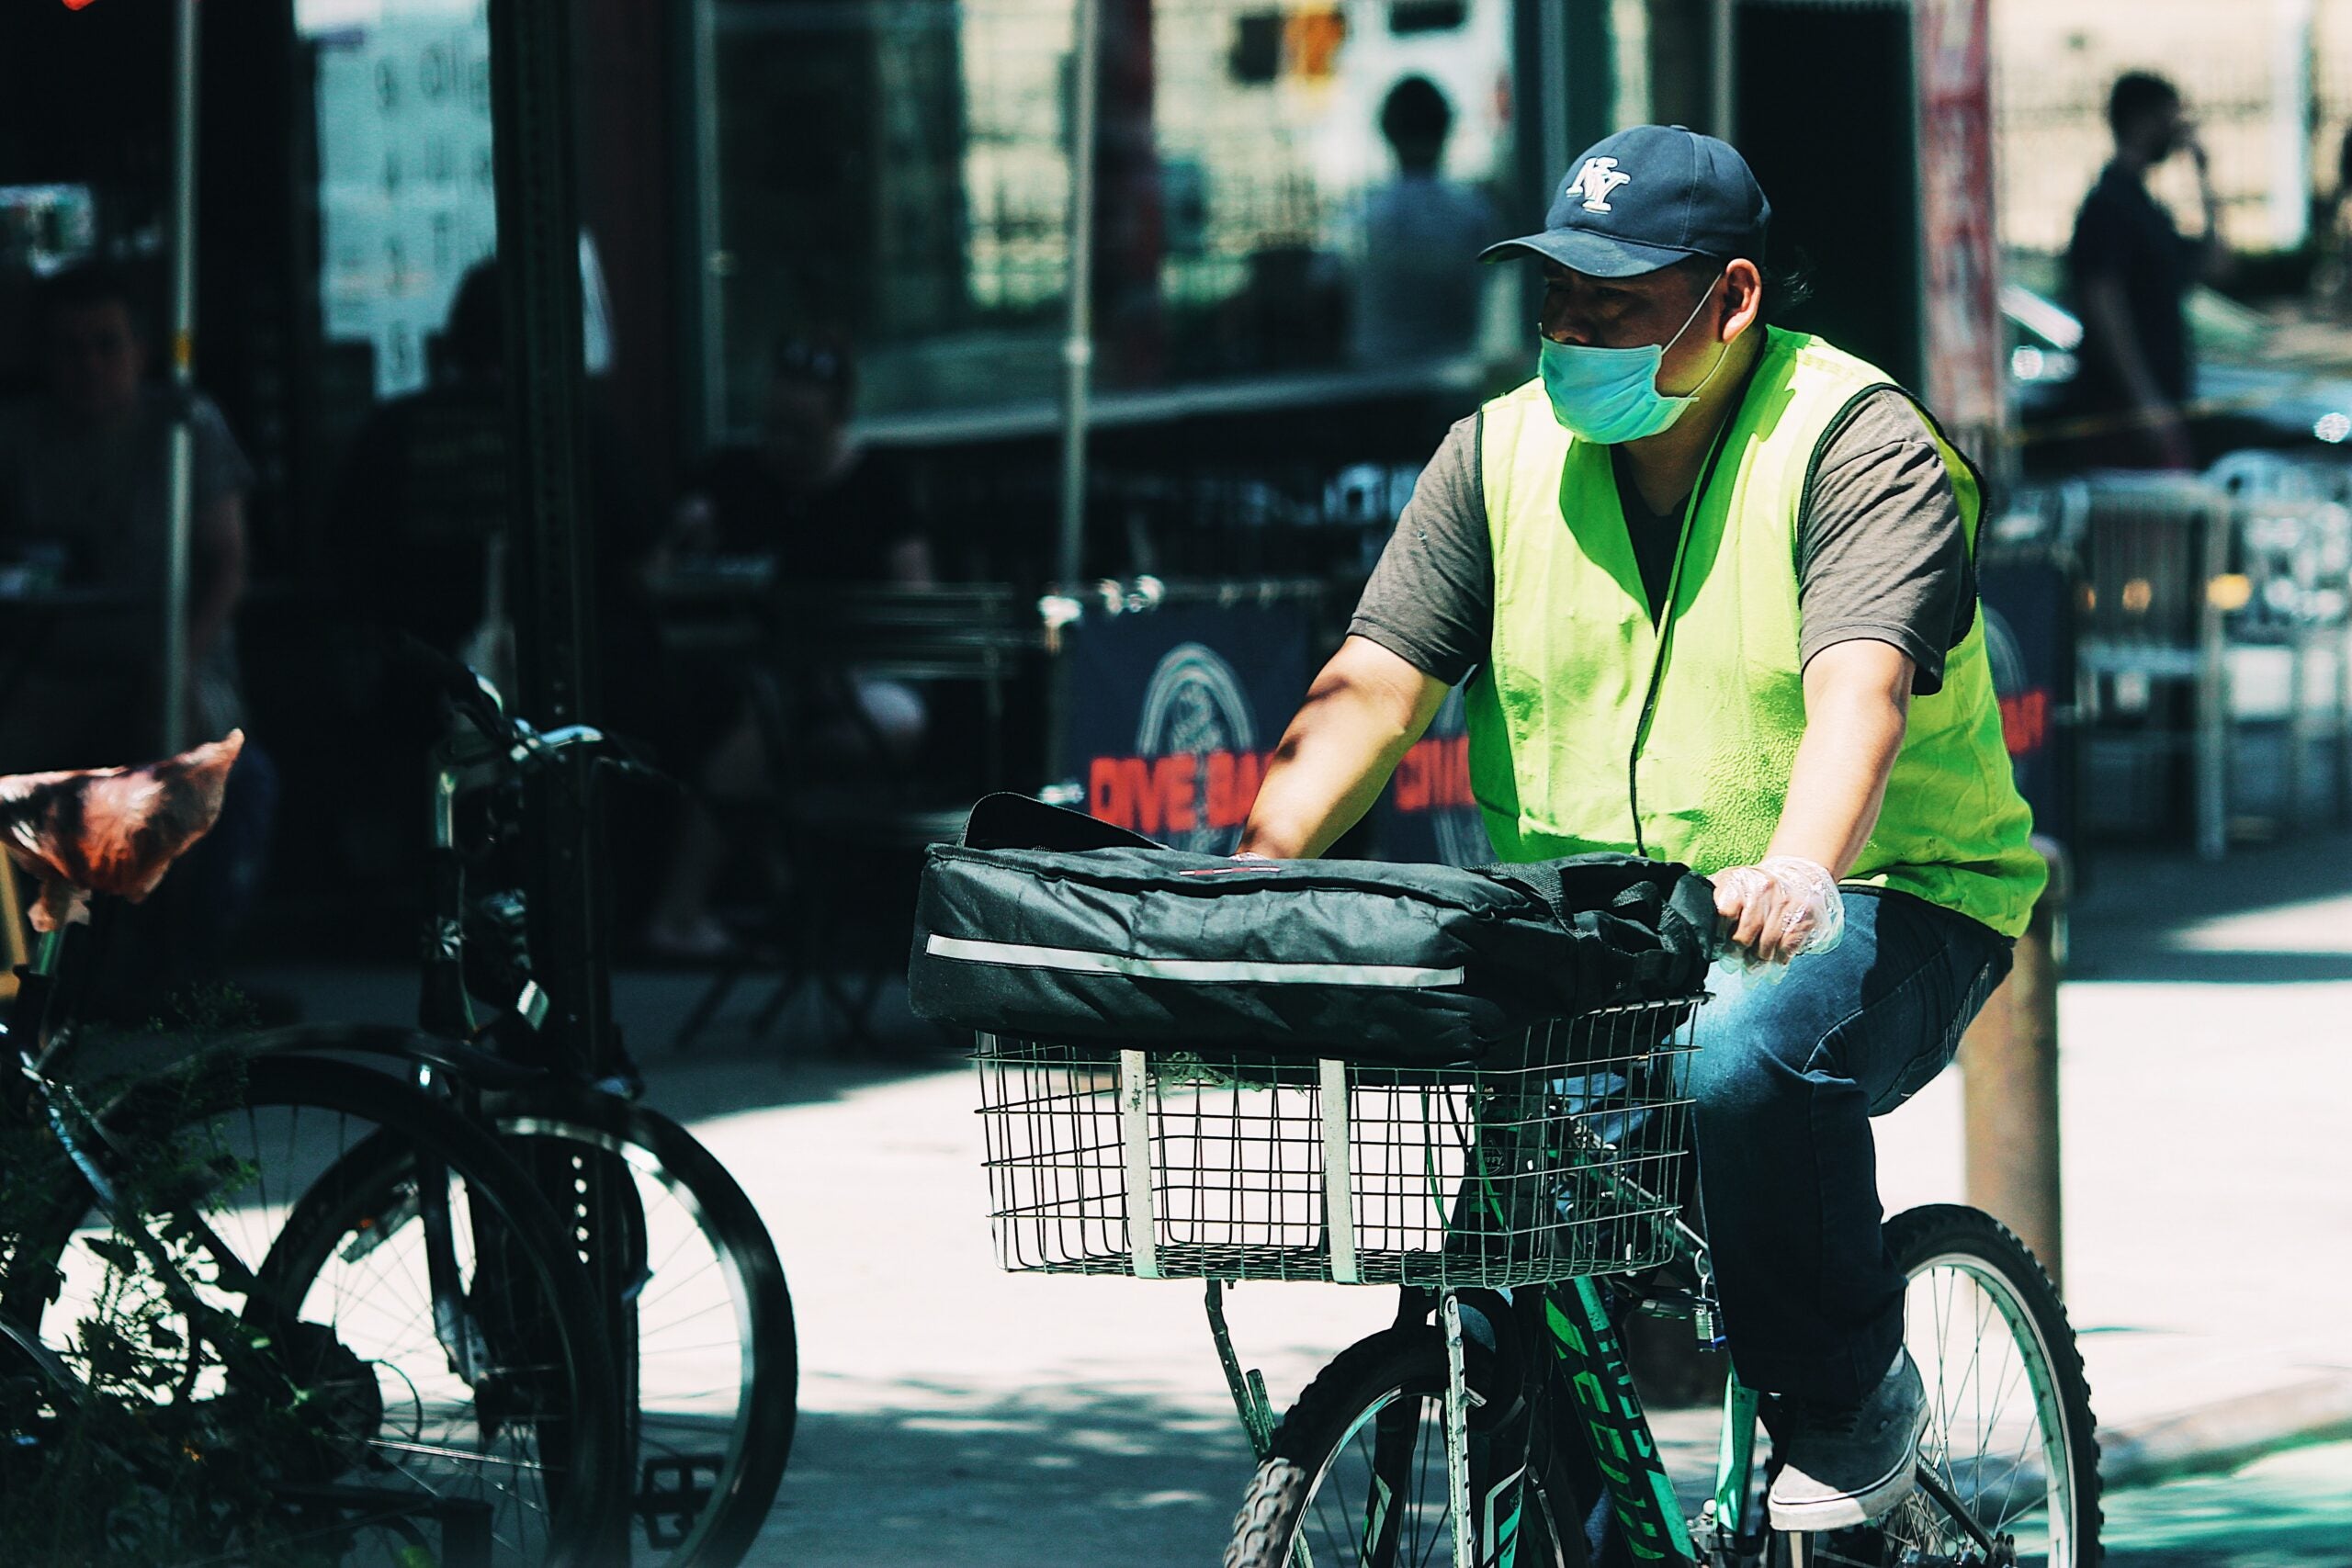 Delivery worker riding a bike.